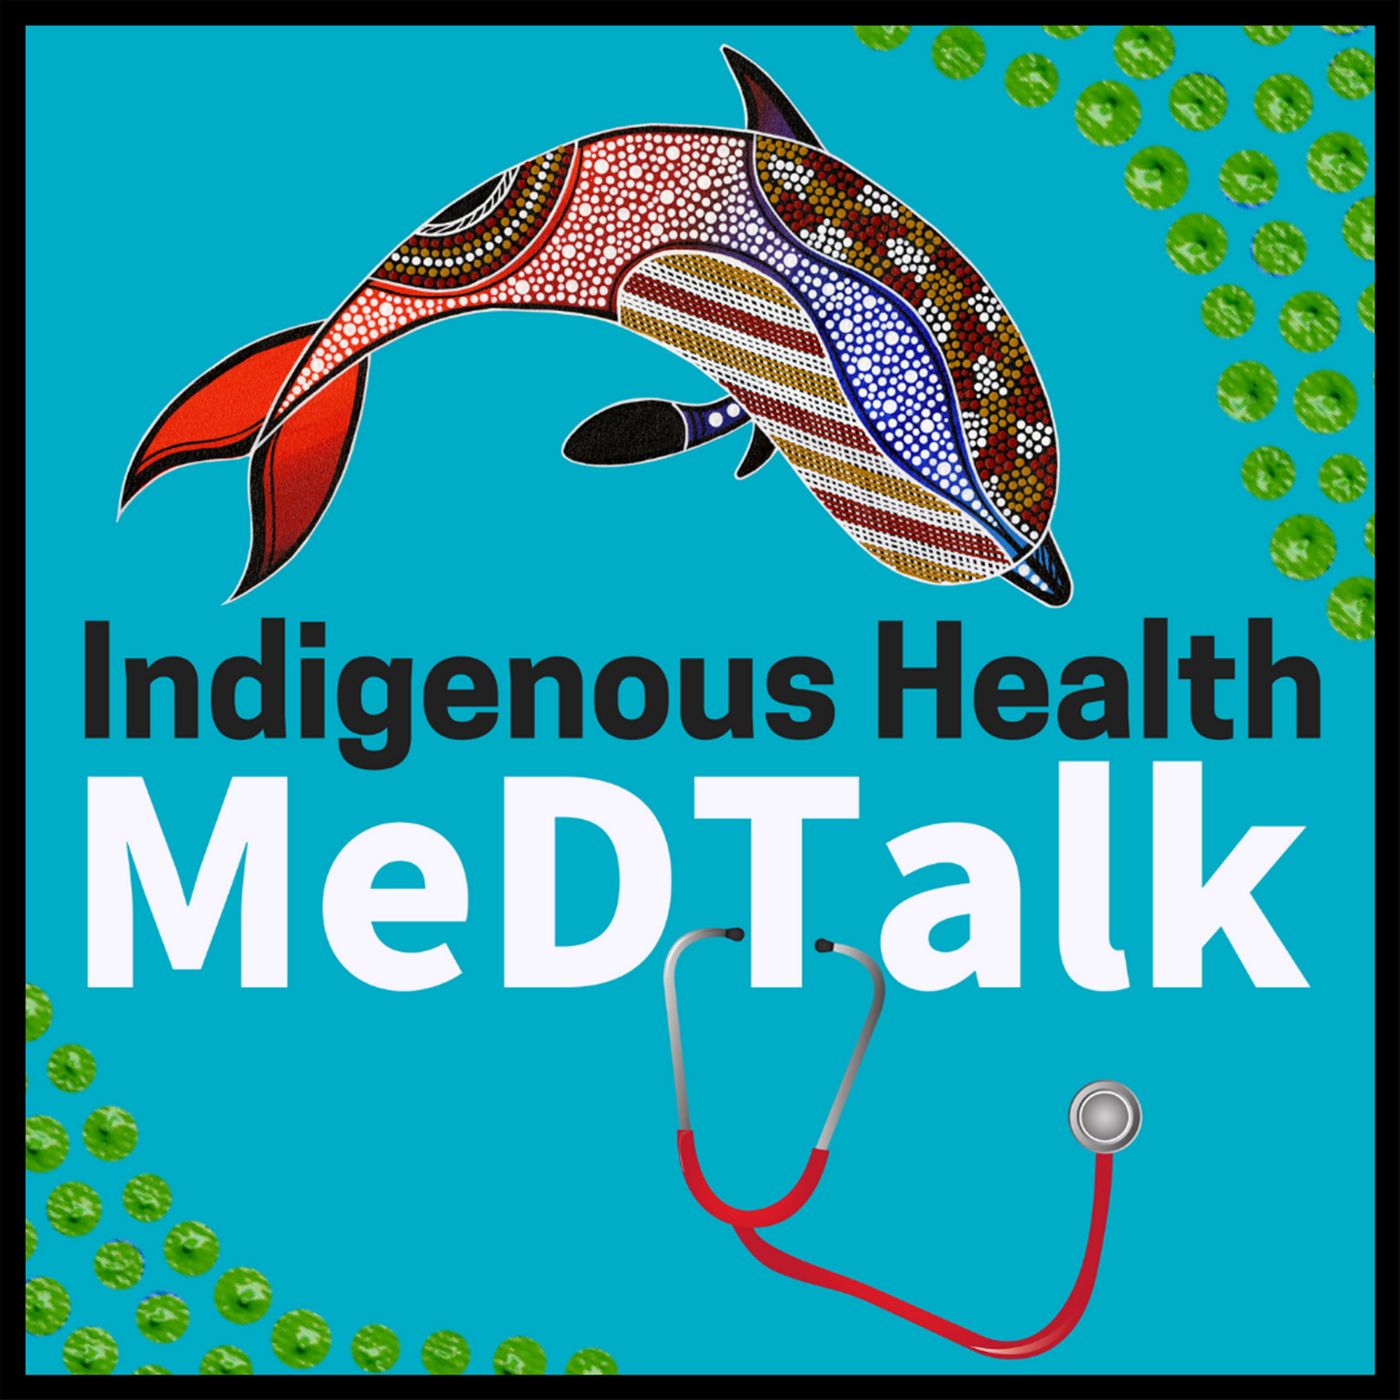 Indigenous Health MedTalk - From Coal Mining to Medicine with Professor Peter O&#x27;Mara